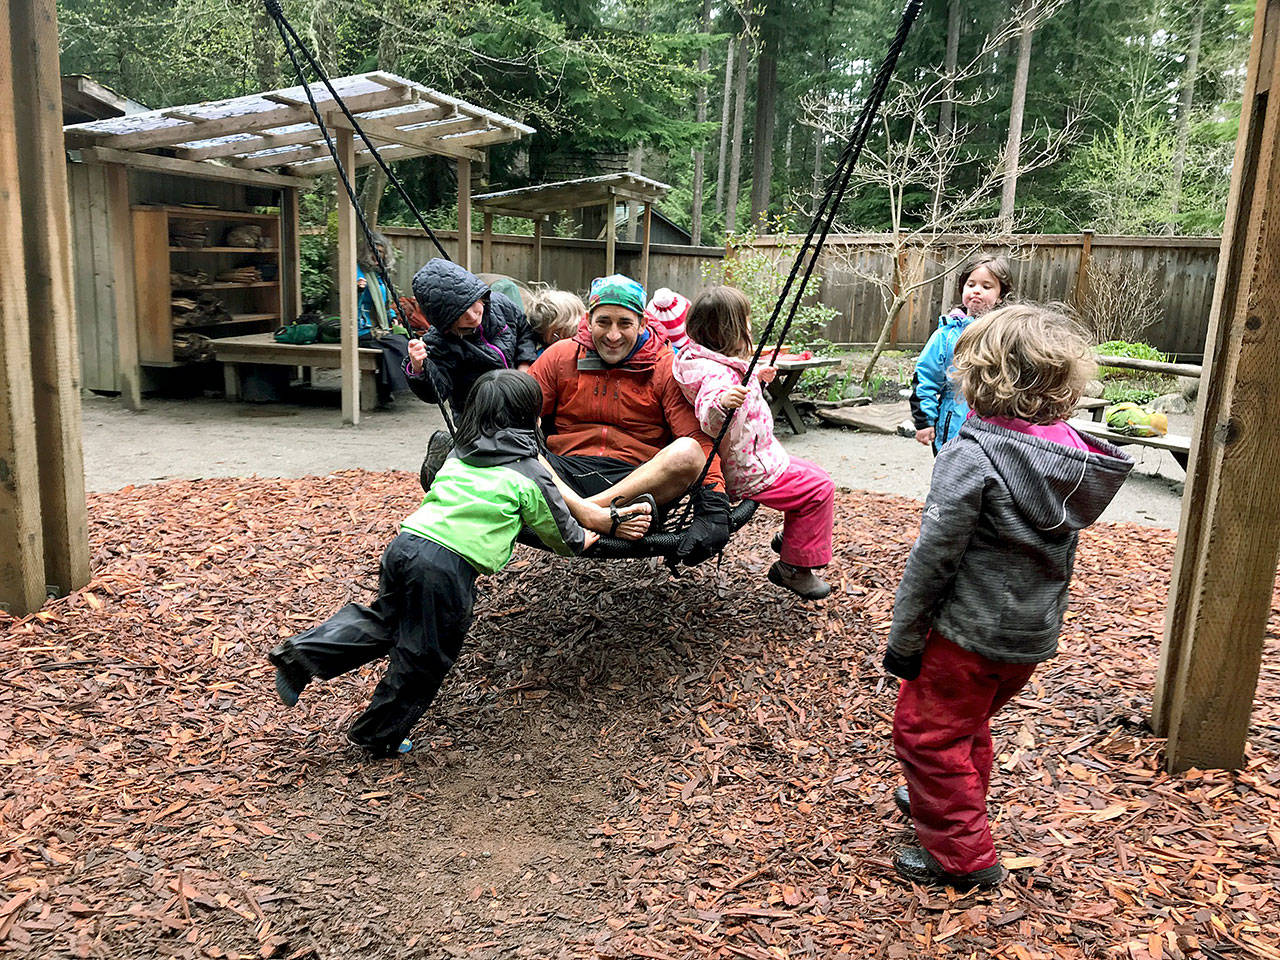 Photo by Carol Johnsen                                Teacher William Dolde with his kindergarten class on the playground swing in 2018. Outdoor playtime is a celebrated activity at the Waldorf school.